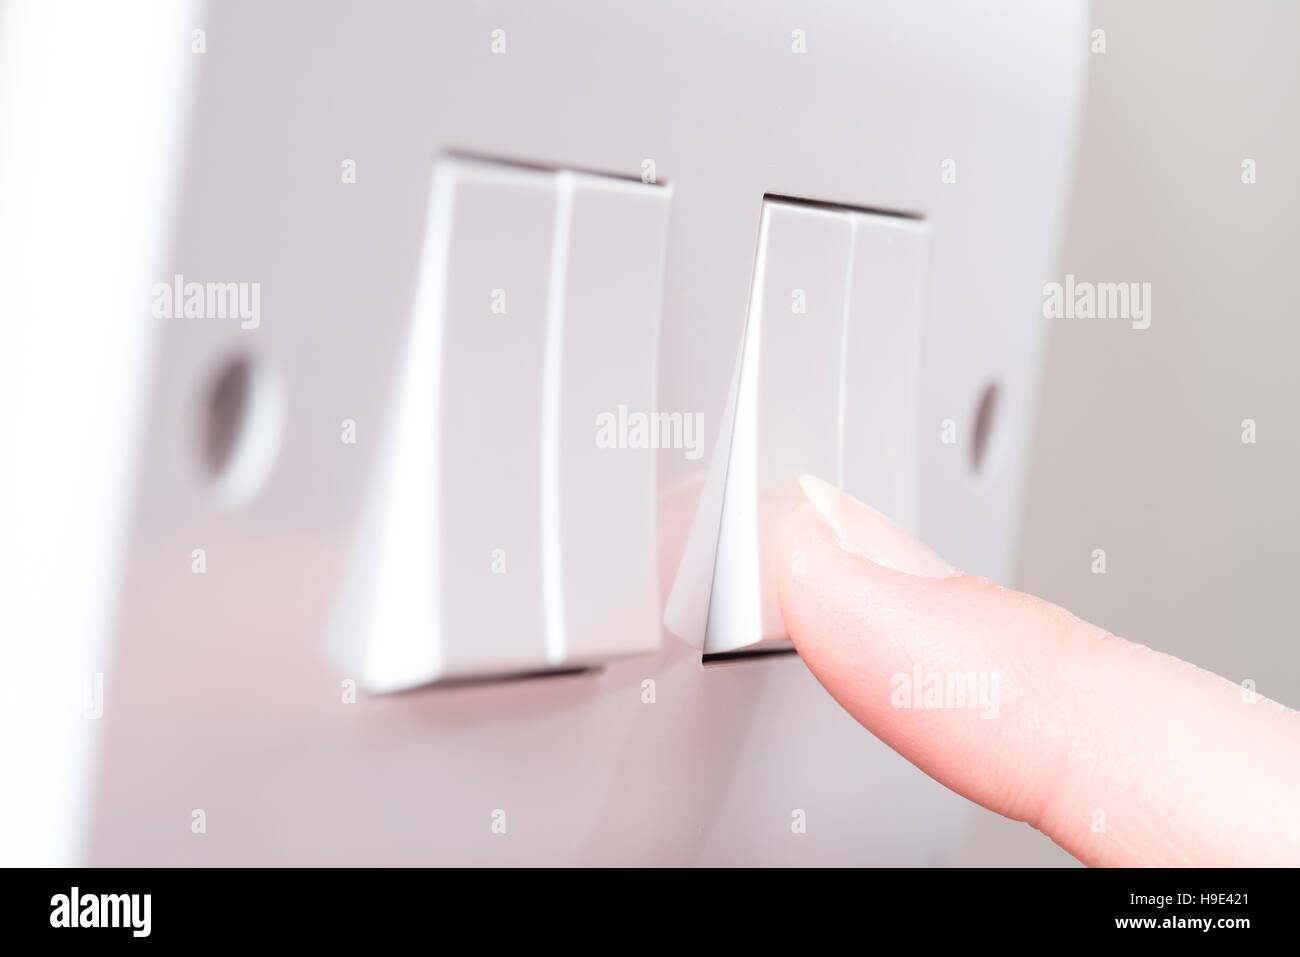 A manicured finger about to swithc on a light by pressing a switch on a white 4 gang light switch Stock Photo